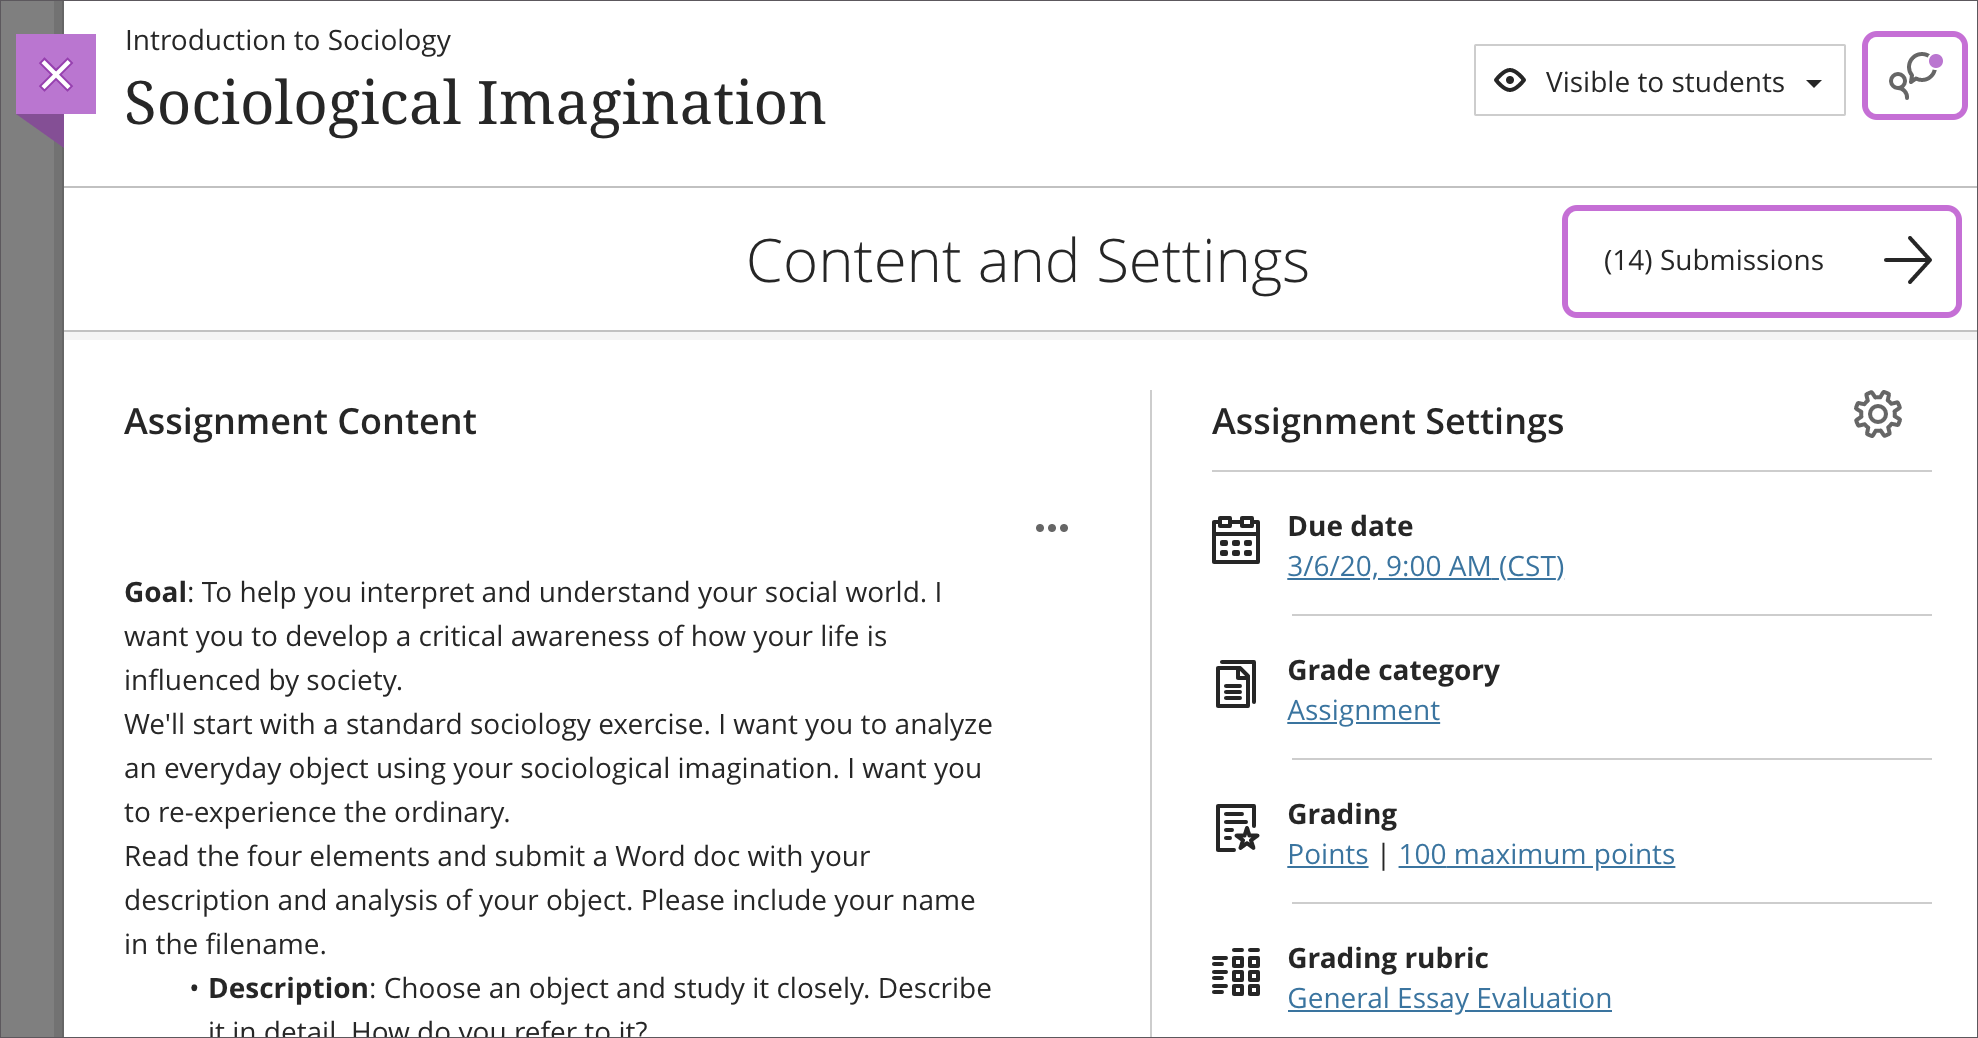 An assignment's Content and Settings page is open with 1) "Open class conversation" icon selected and highlighted, and 2) the "Submissions" link highlighted. 